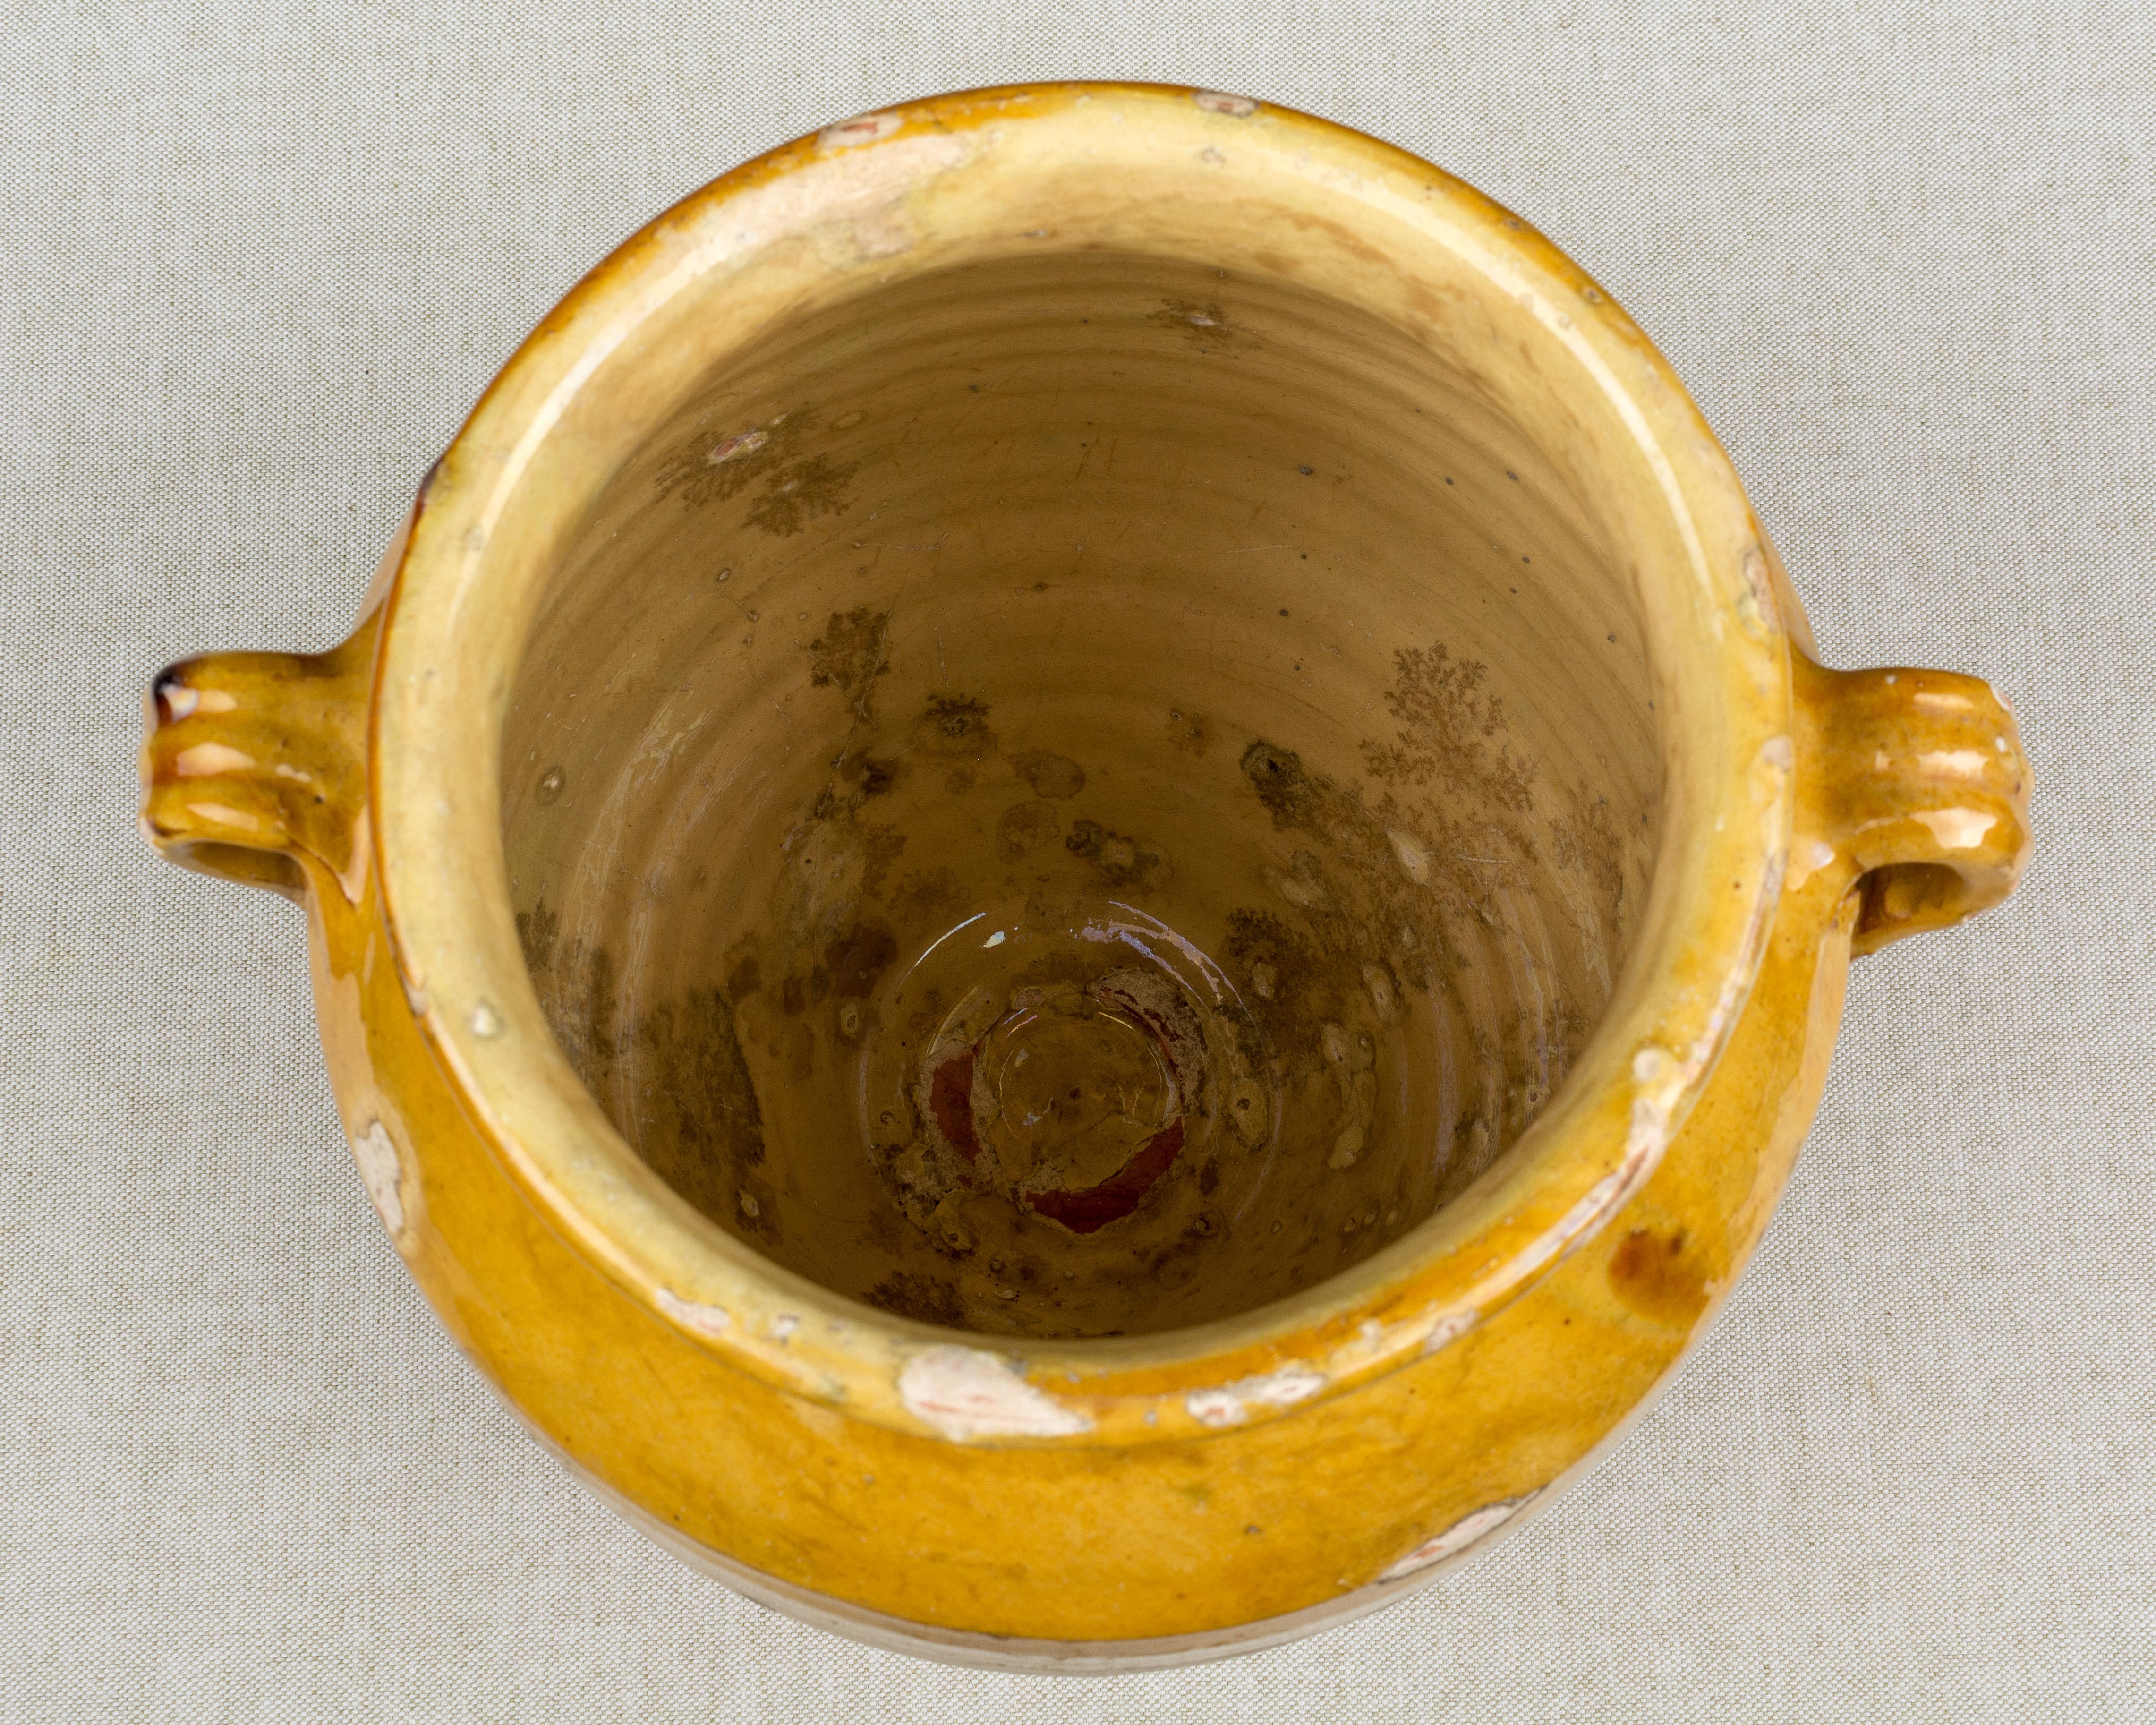 An earthenware confit pot from the Southwest of France with traditional ochre yellow glaze. Beautiful patina and bright yellow color. Minor losses to glaze. These ordinary earthenware vessels were once used daily in the French country home and have